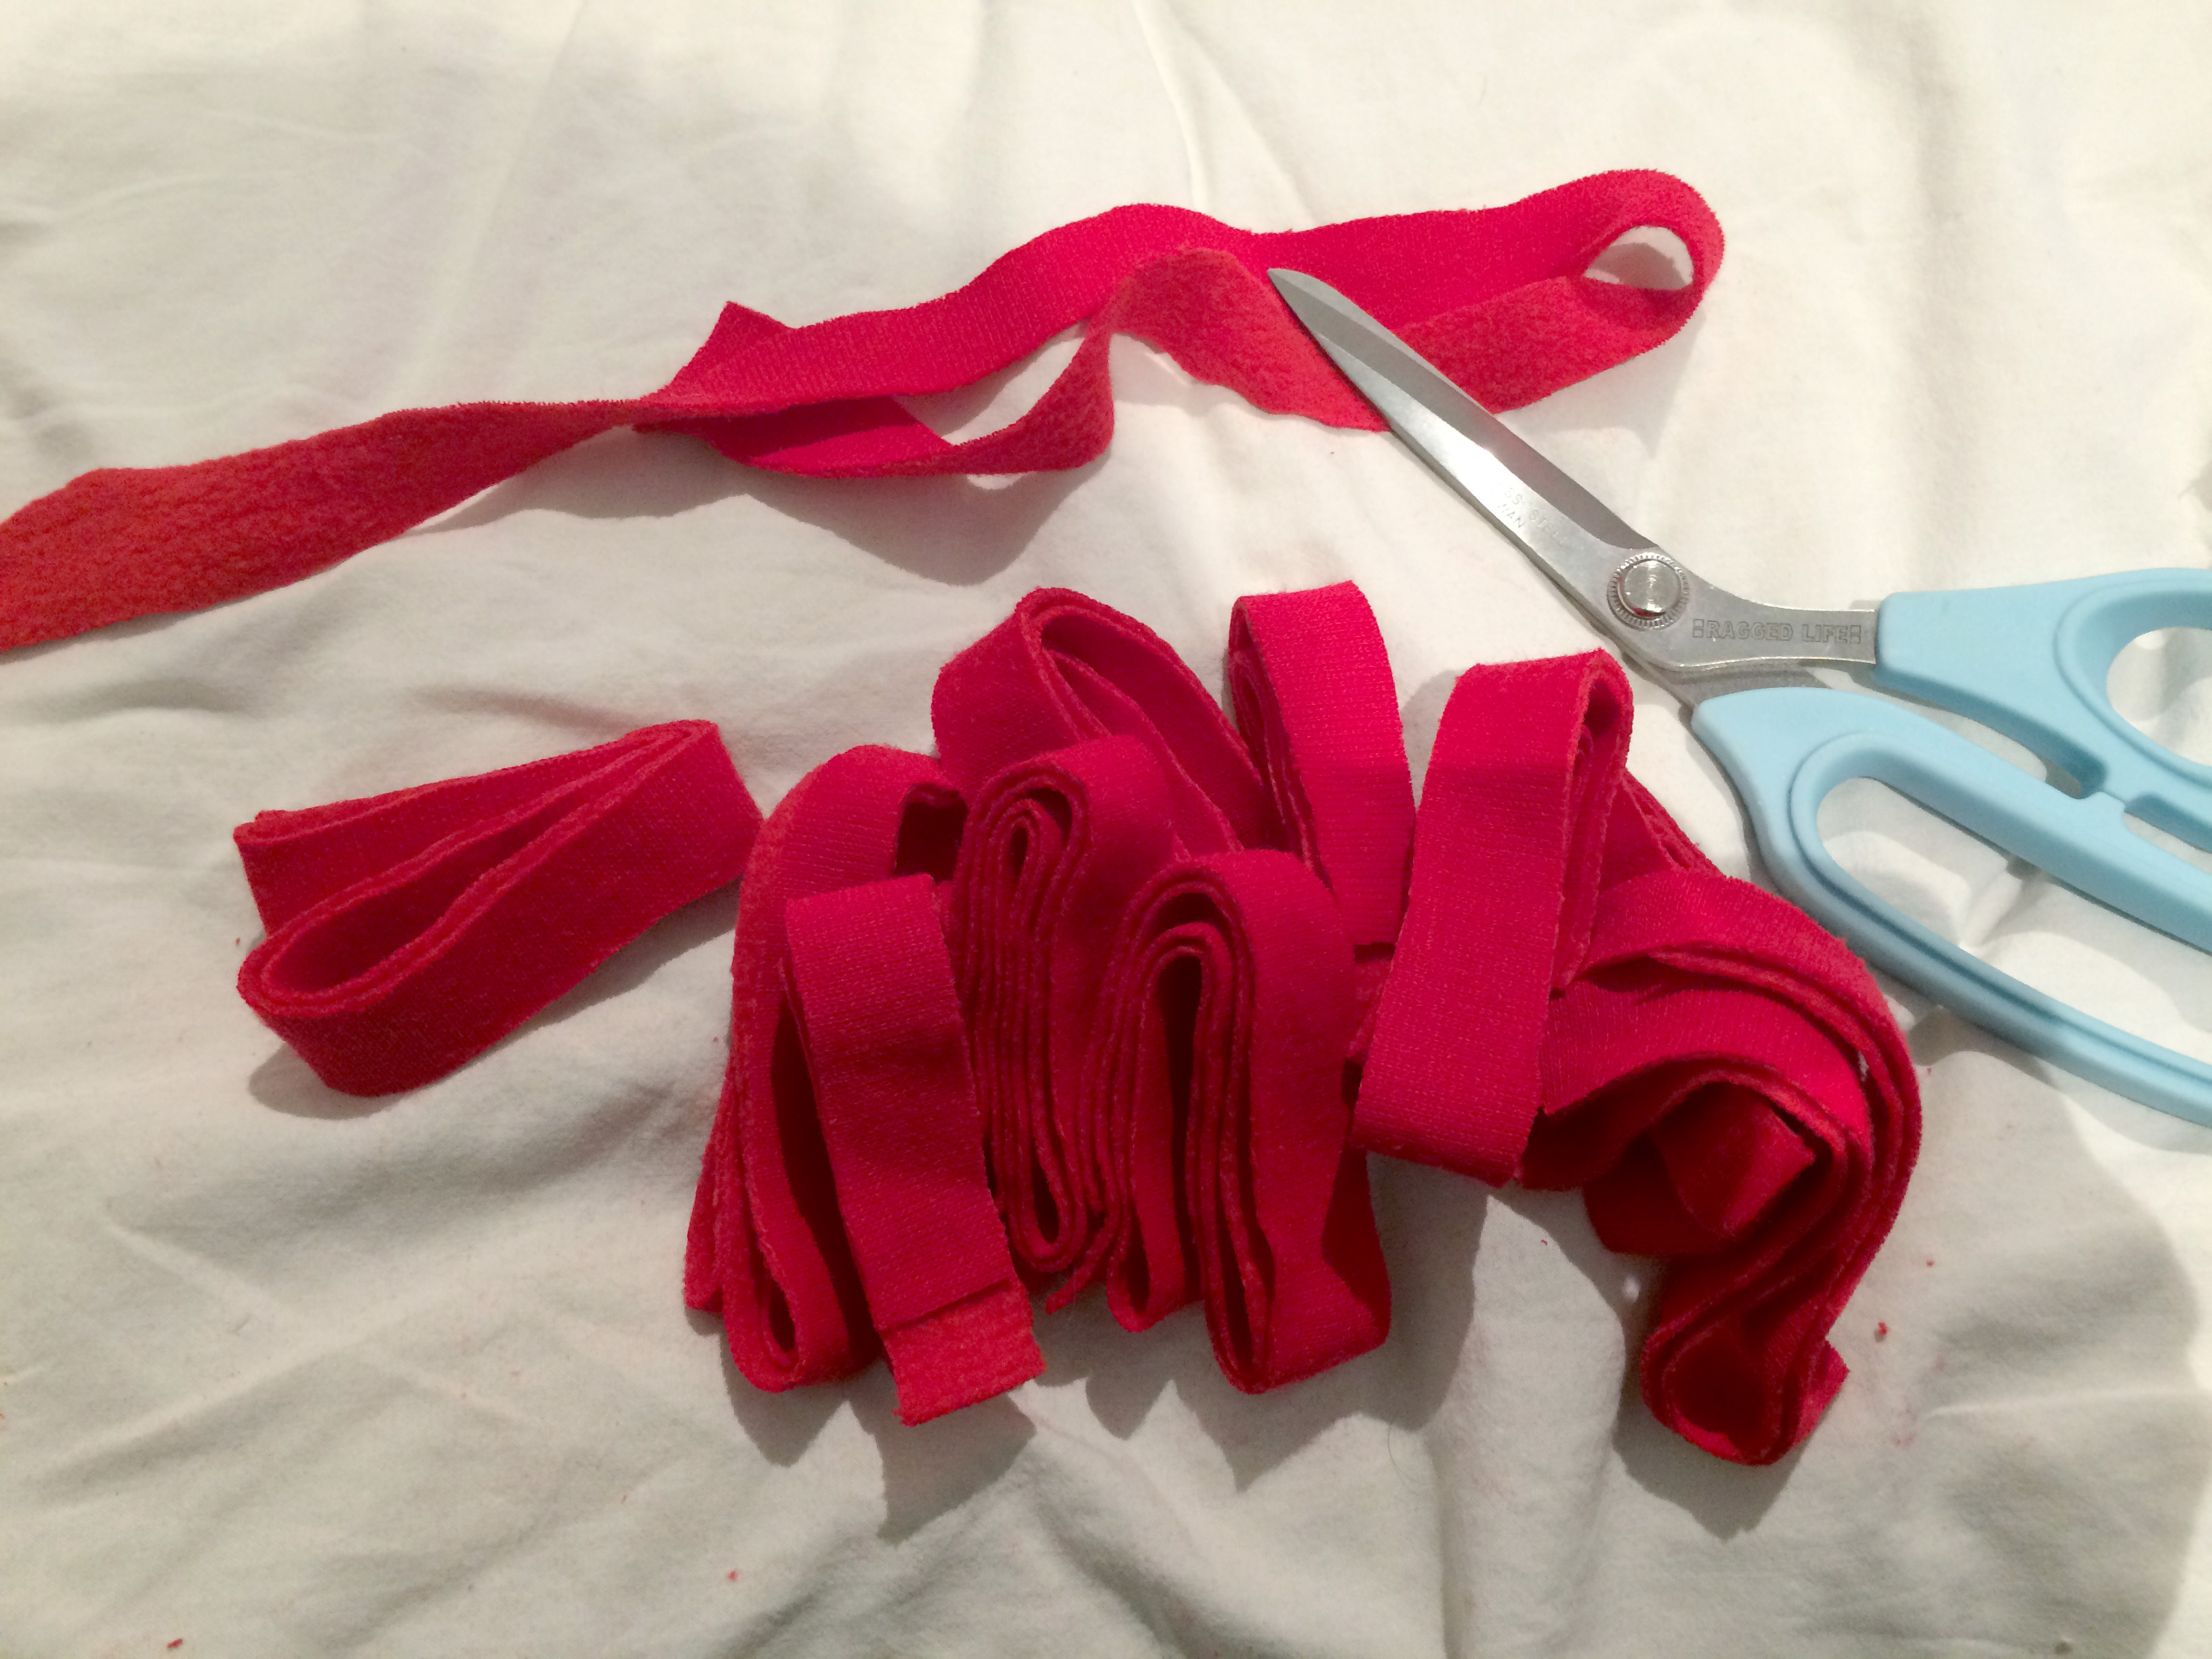 Cutting up red fabric in bed